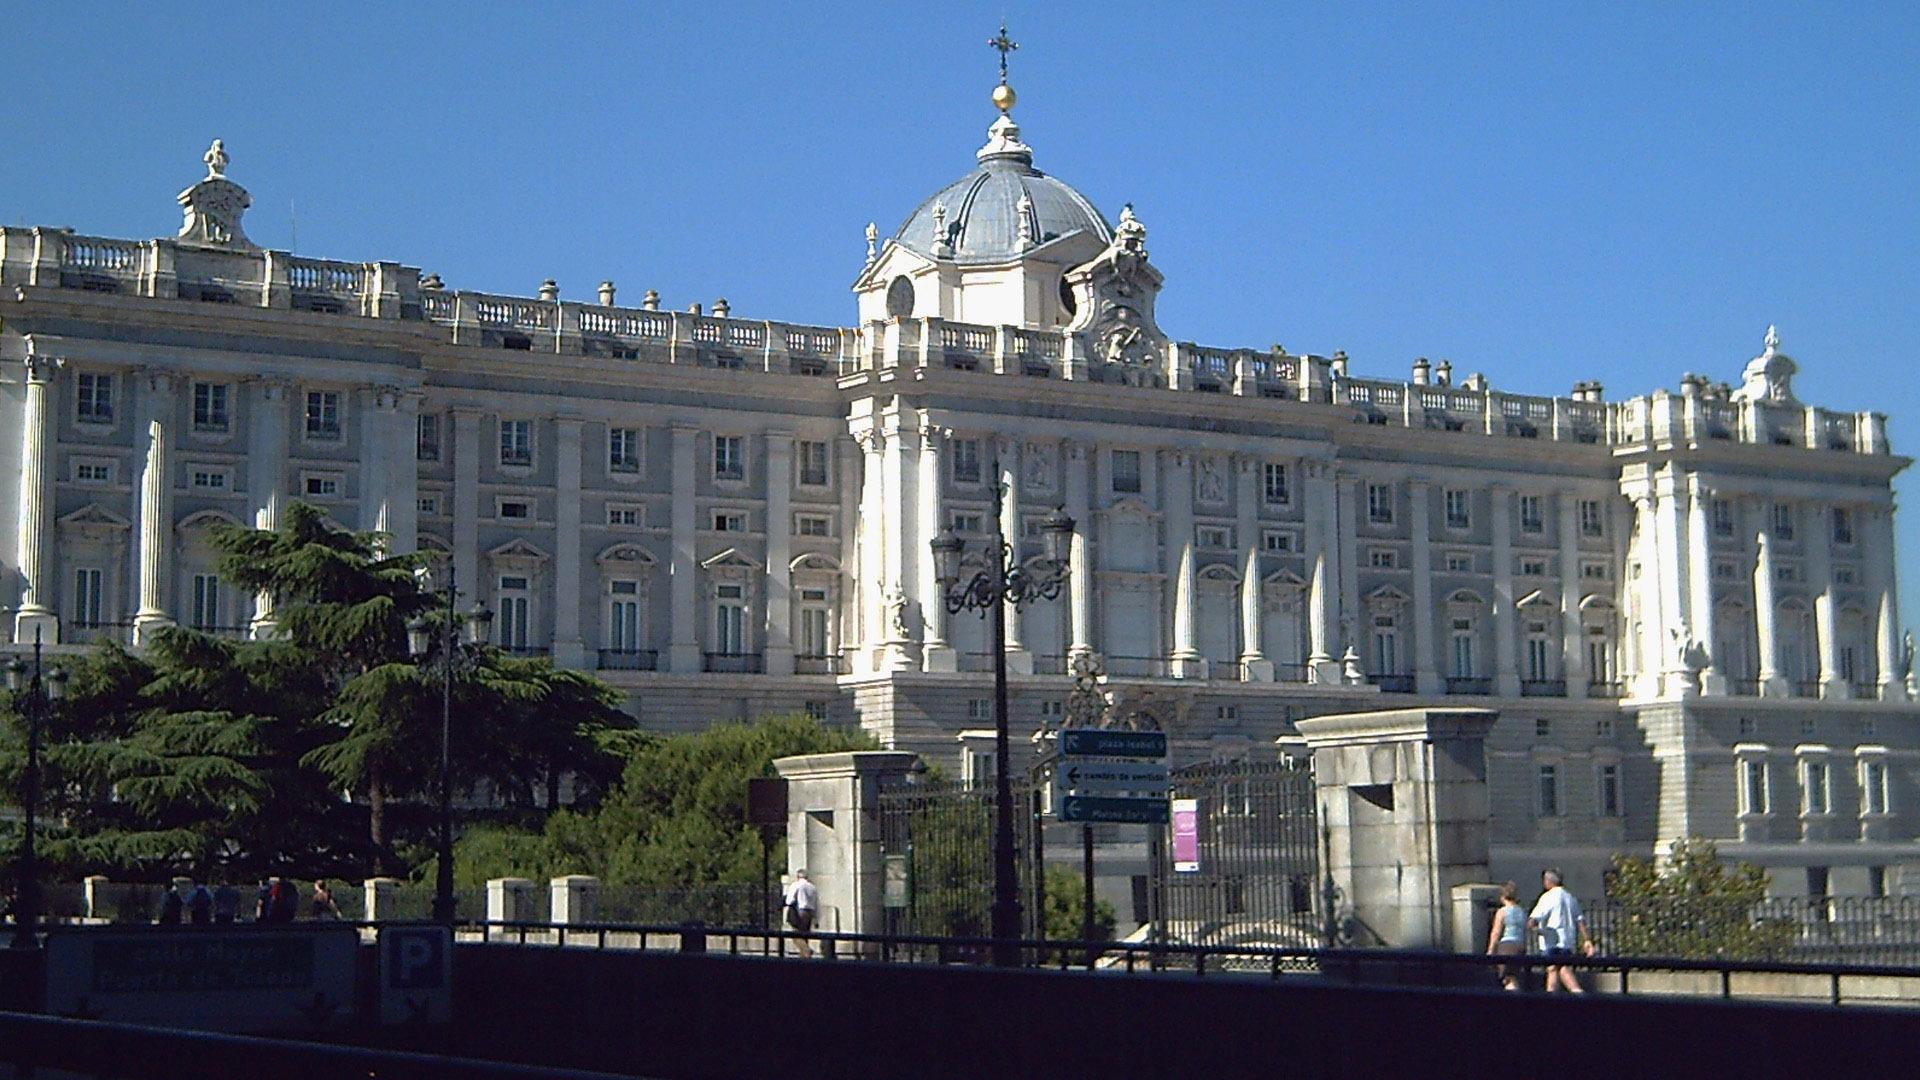 Royal Palace of Madrid wallpaper and image, picture